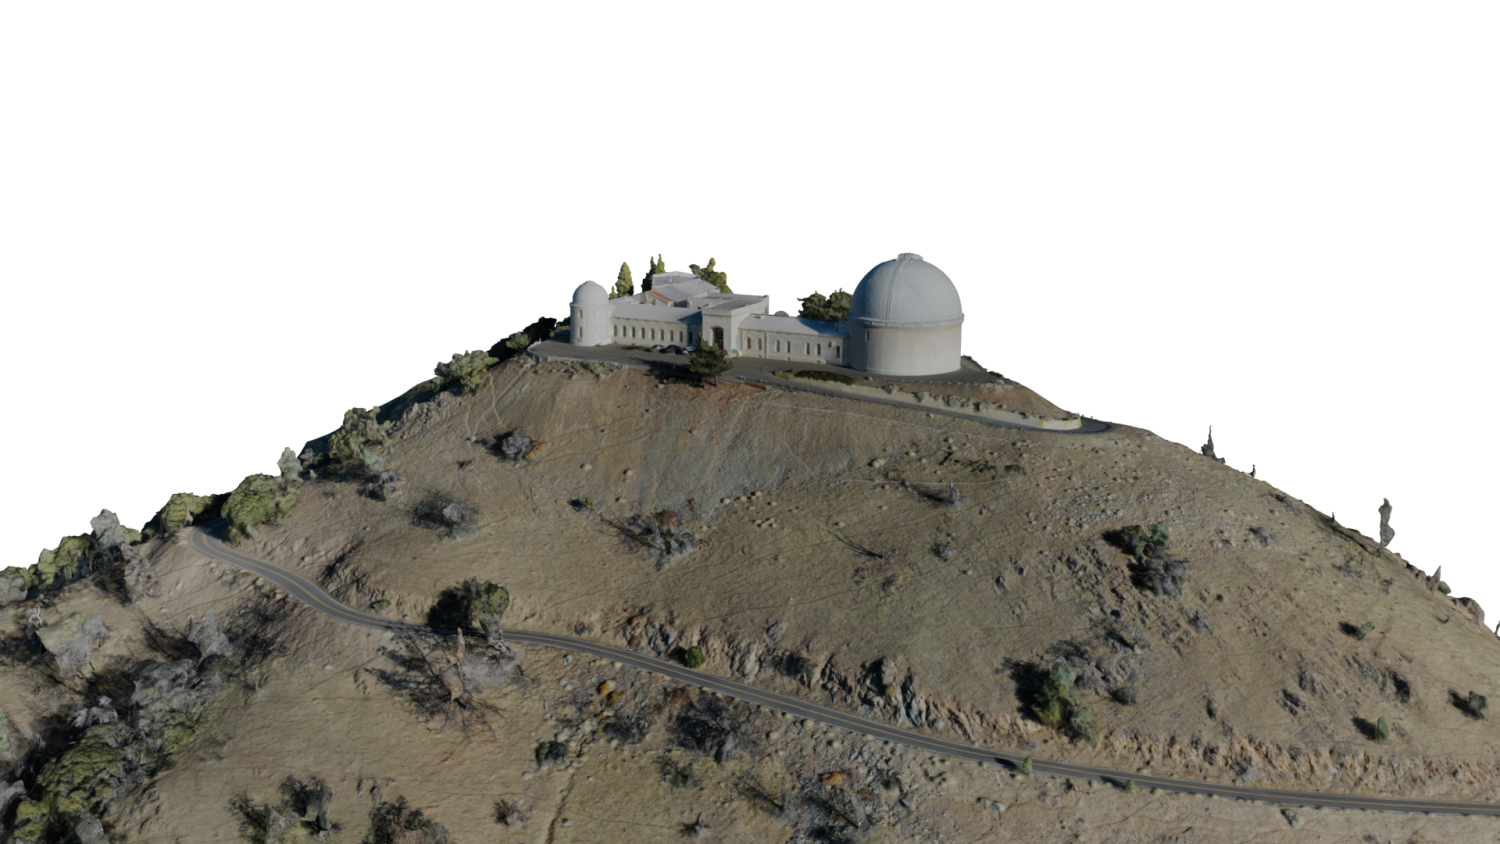 A 3d model of a building on top of a hill.